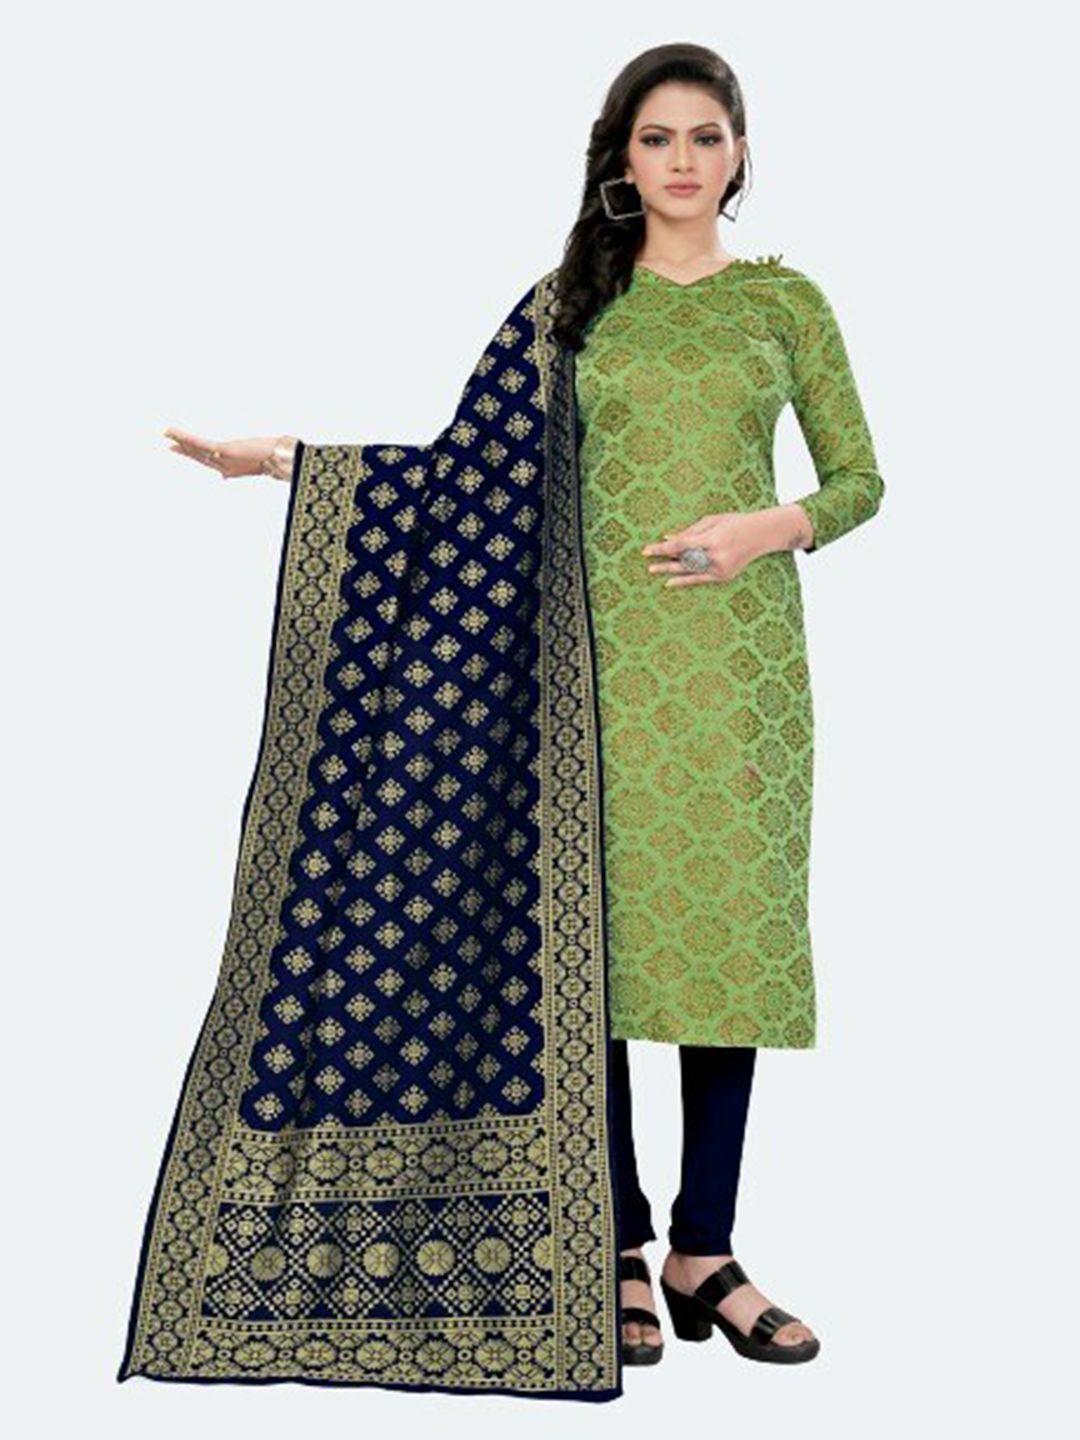 morly green & blue dupion silk unstitched dress material